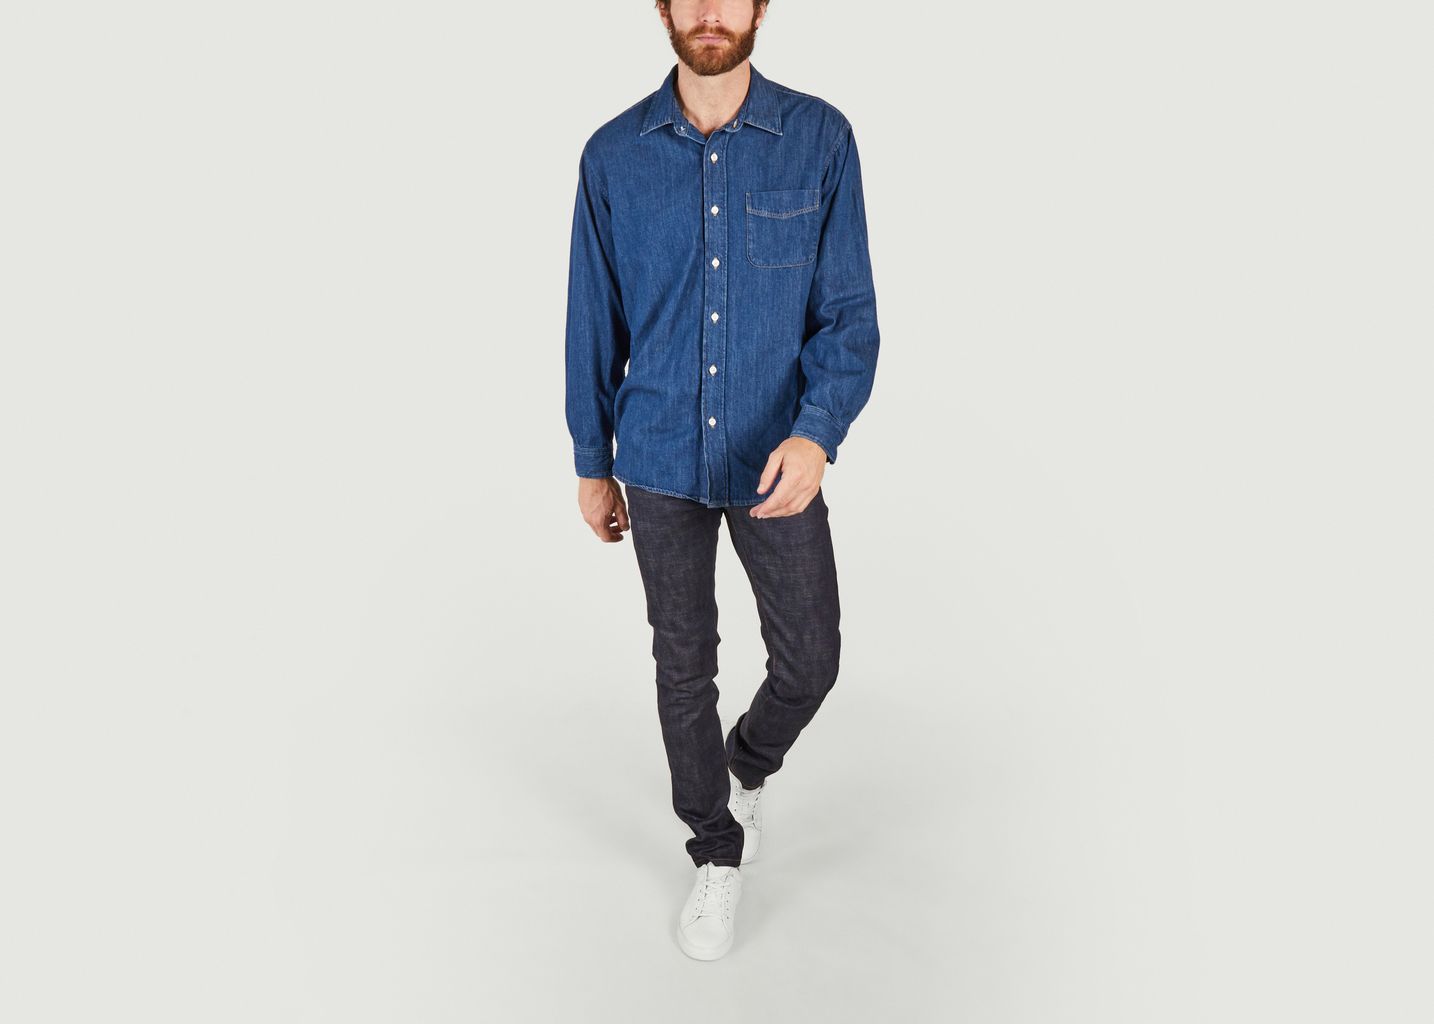 Casual Some Kind Of Blue Denim Shirt - Nudie Jeans